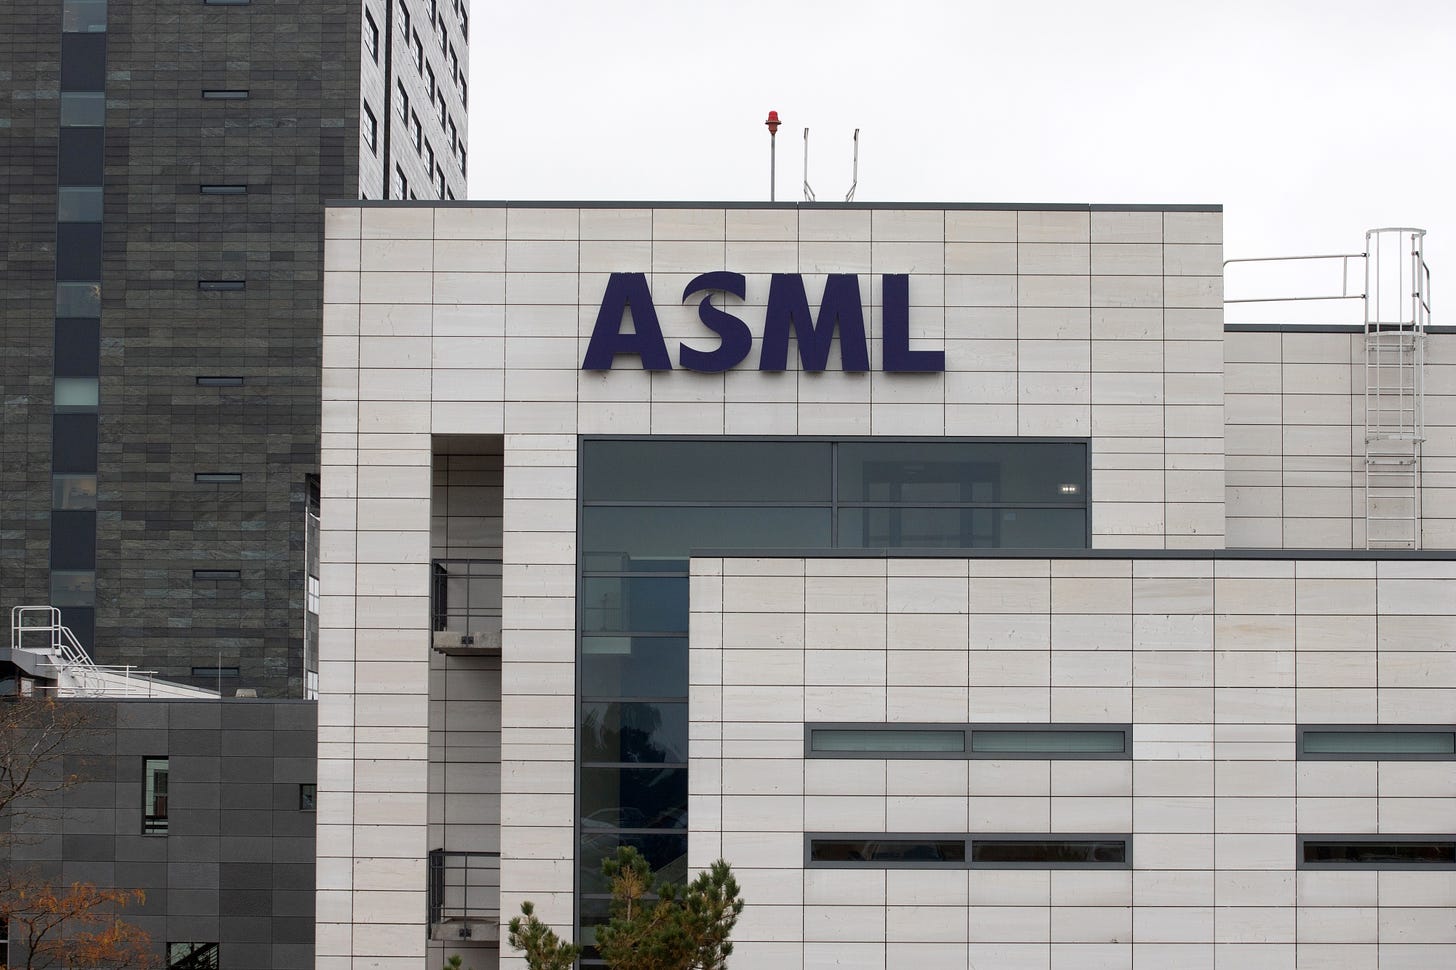 ASML to Invest in Affordable Housing in Brainport Eindhoven, Netherlands -  Bloomberg